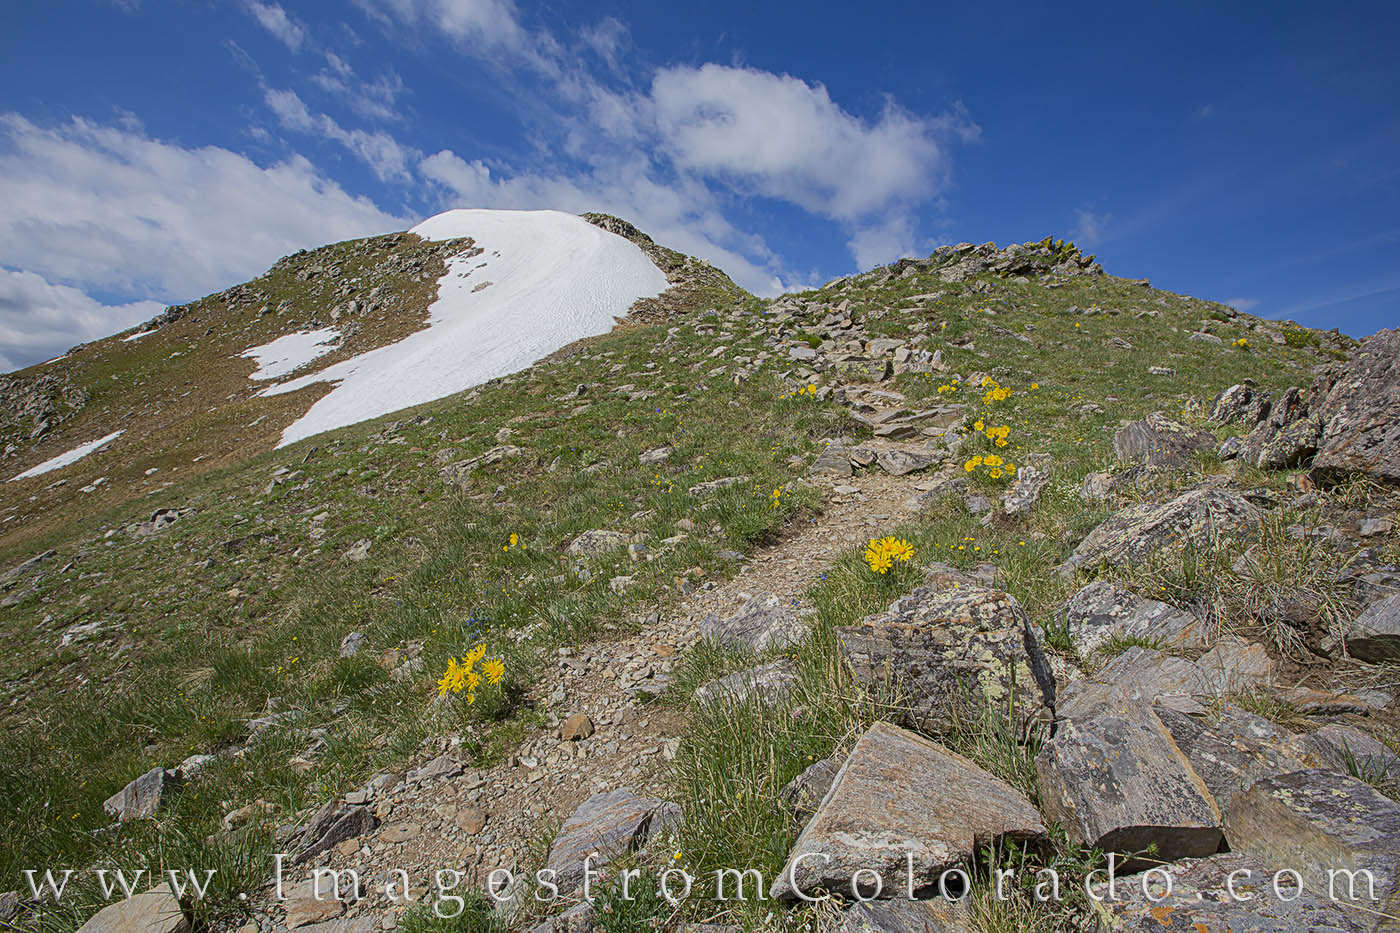 Near the top of the nearly 13,000’ peak in Fraser, Colorado, sunflowers line the trail and a bit of winter’s snow lingers...